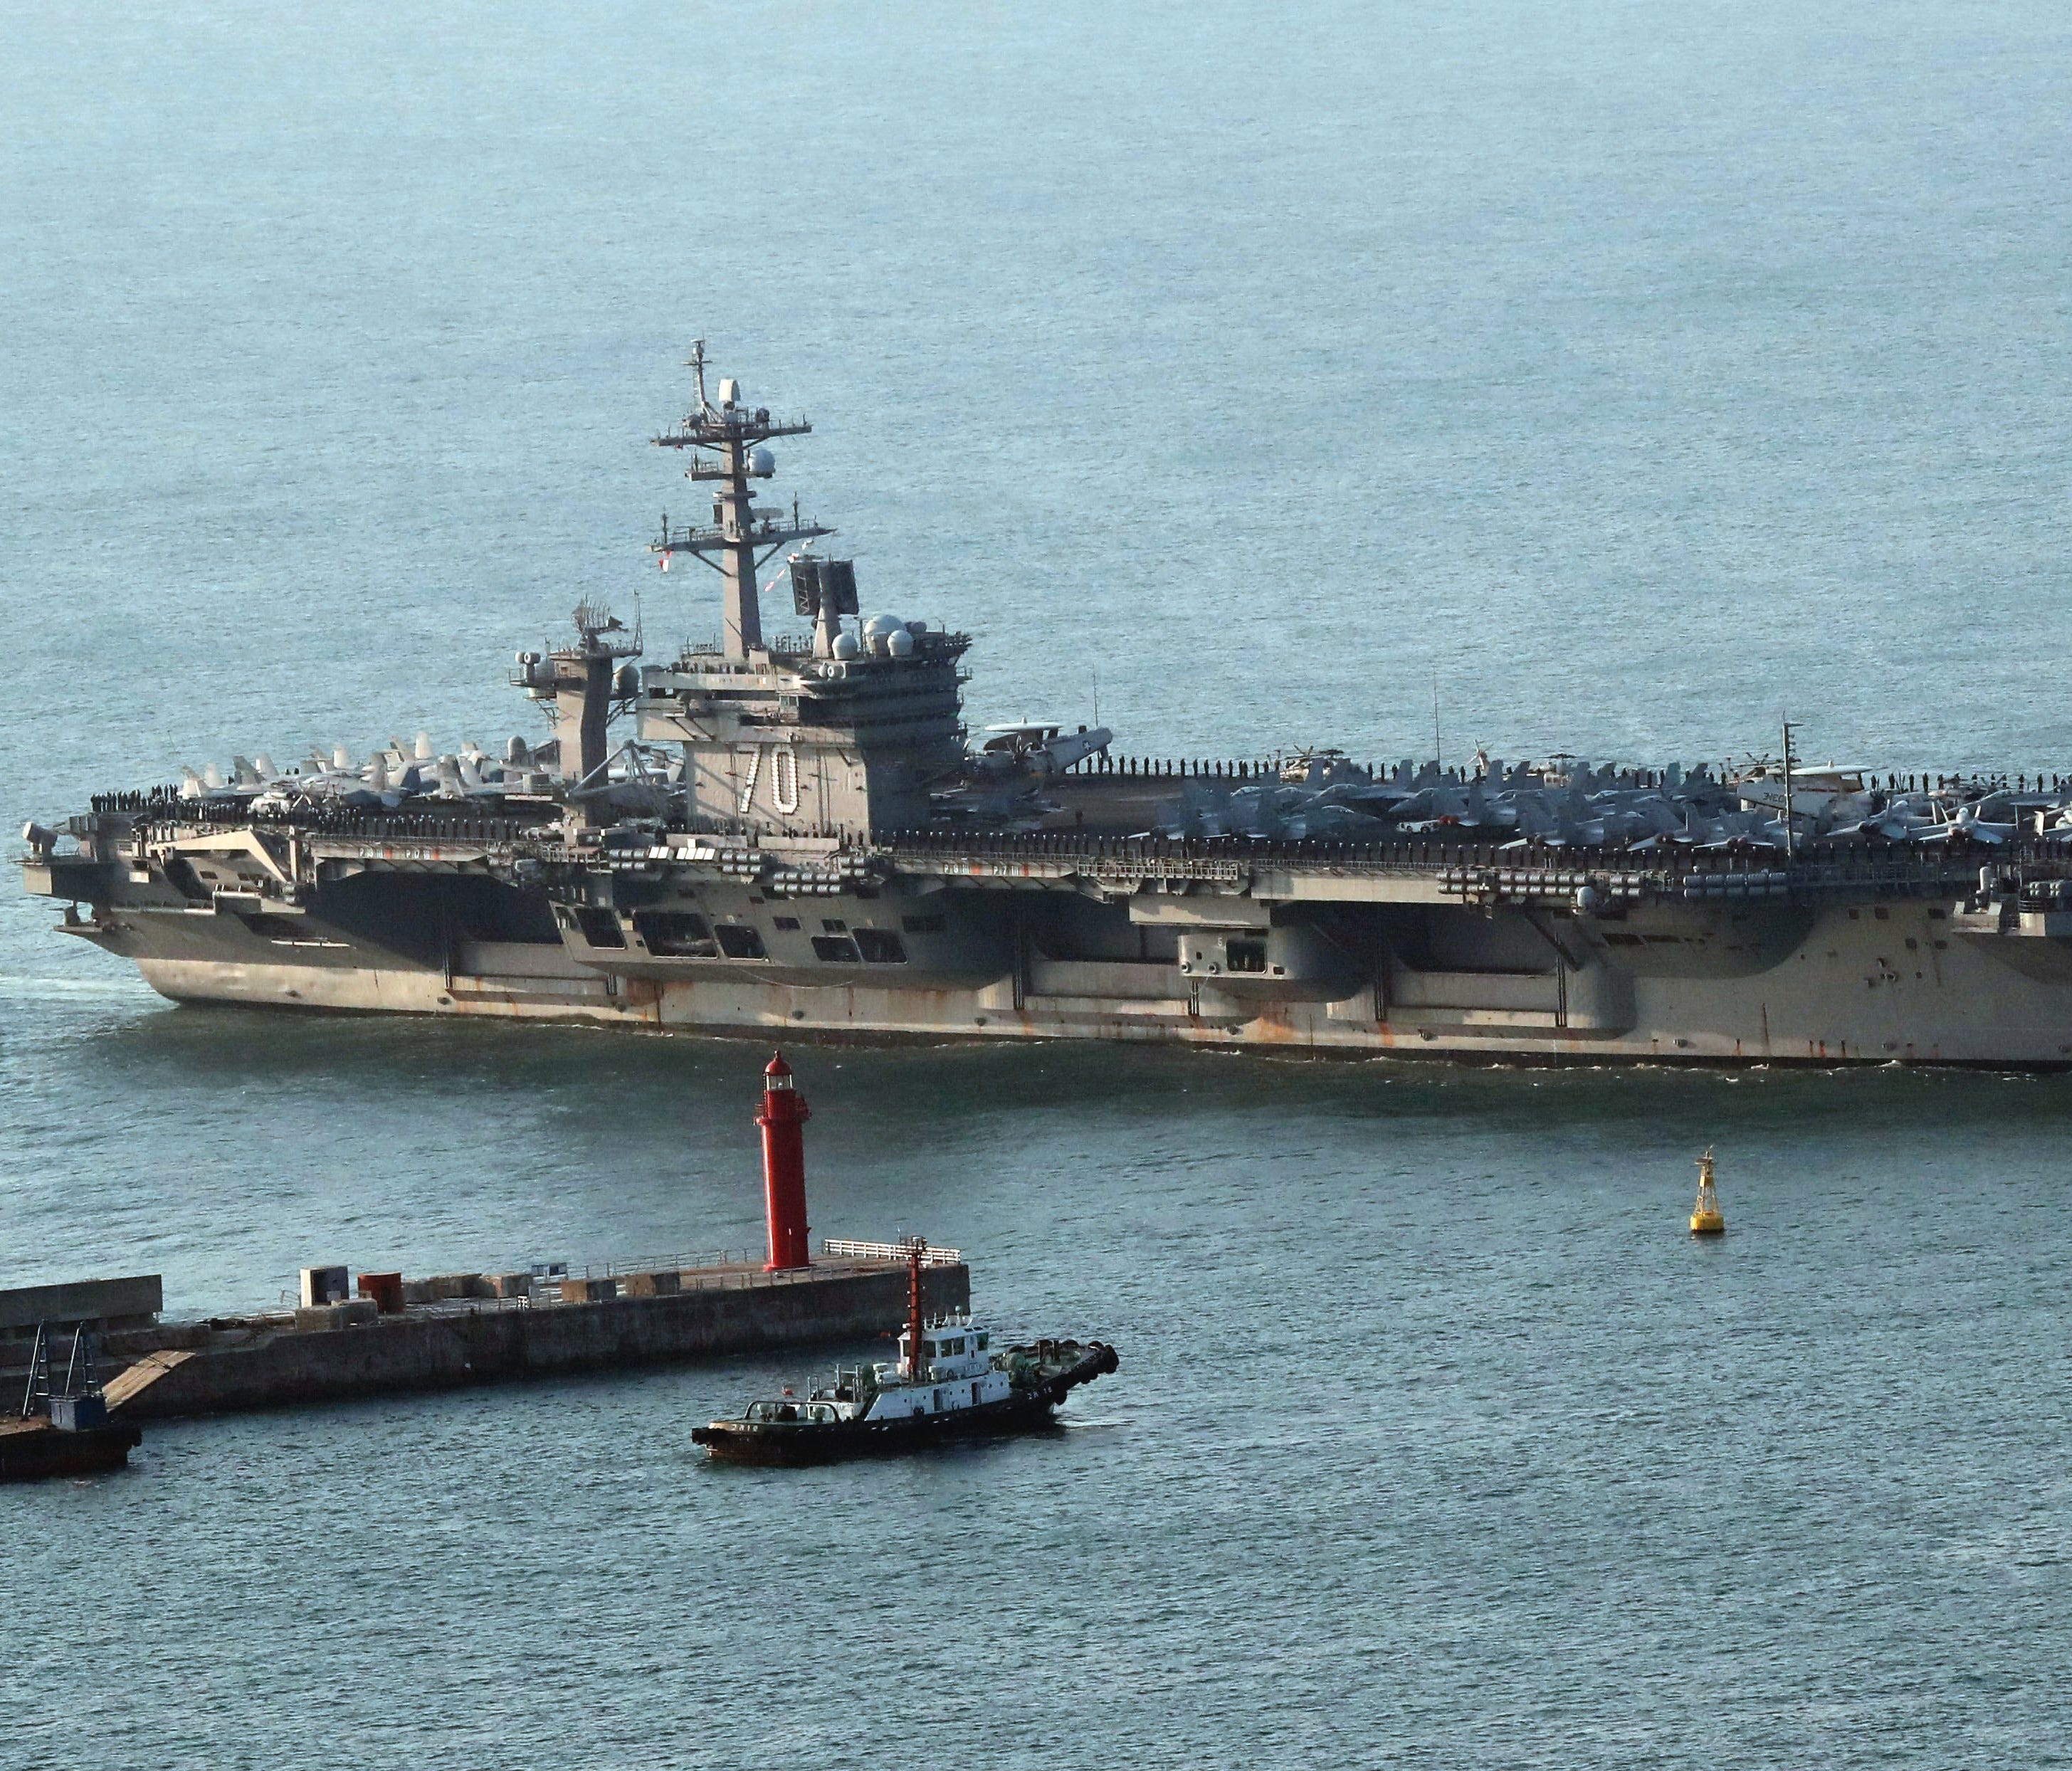 The USS Carl Vinson supercarrier arrives at a port in Busan, South Korea on March 15, 2017